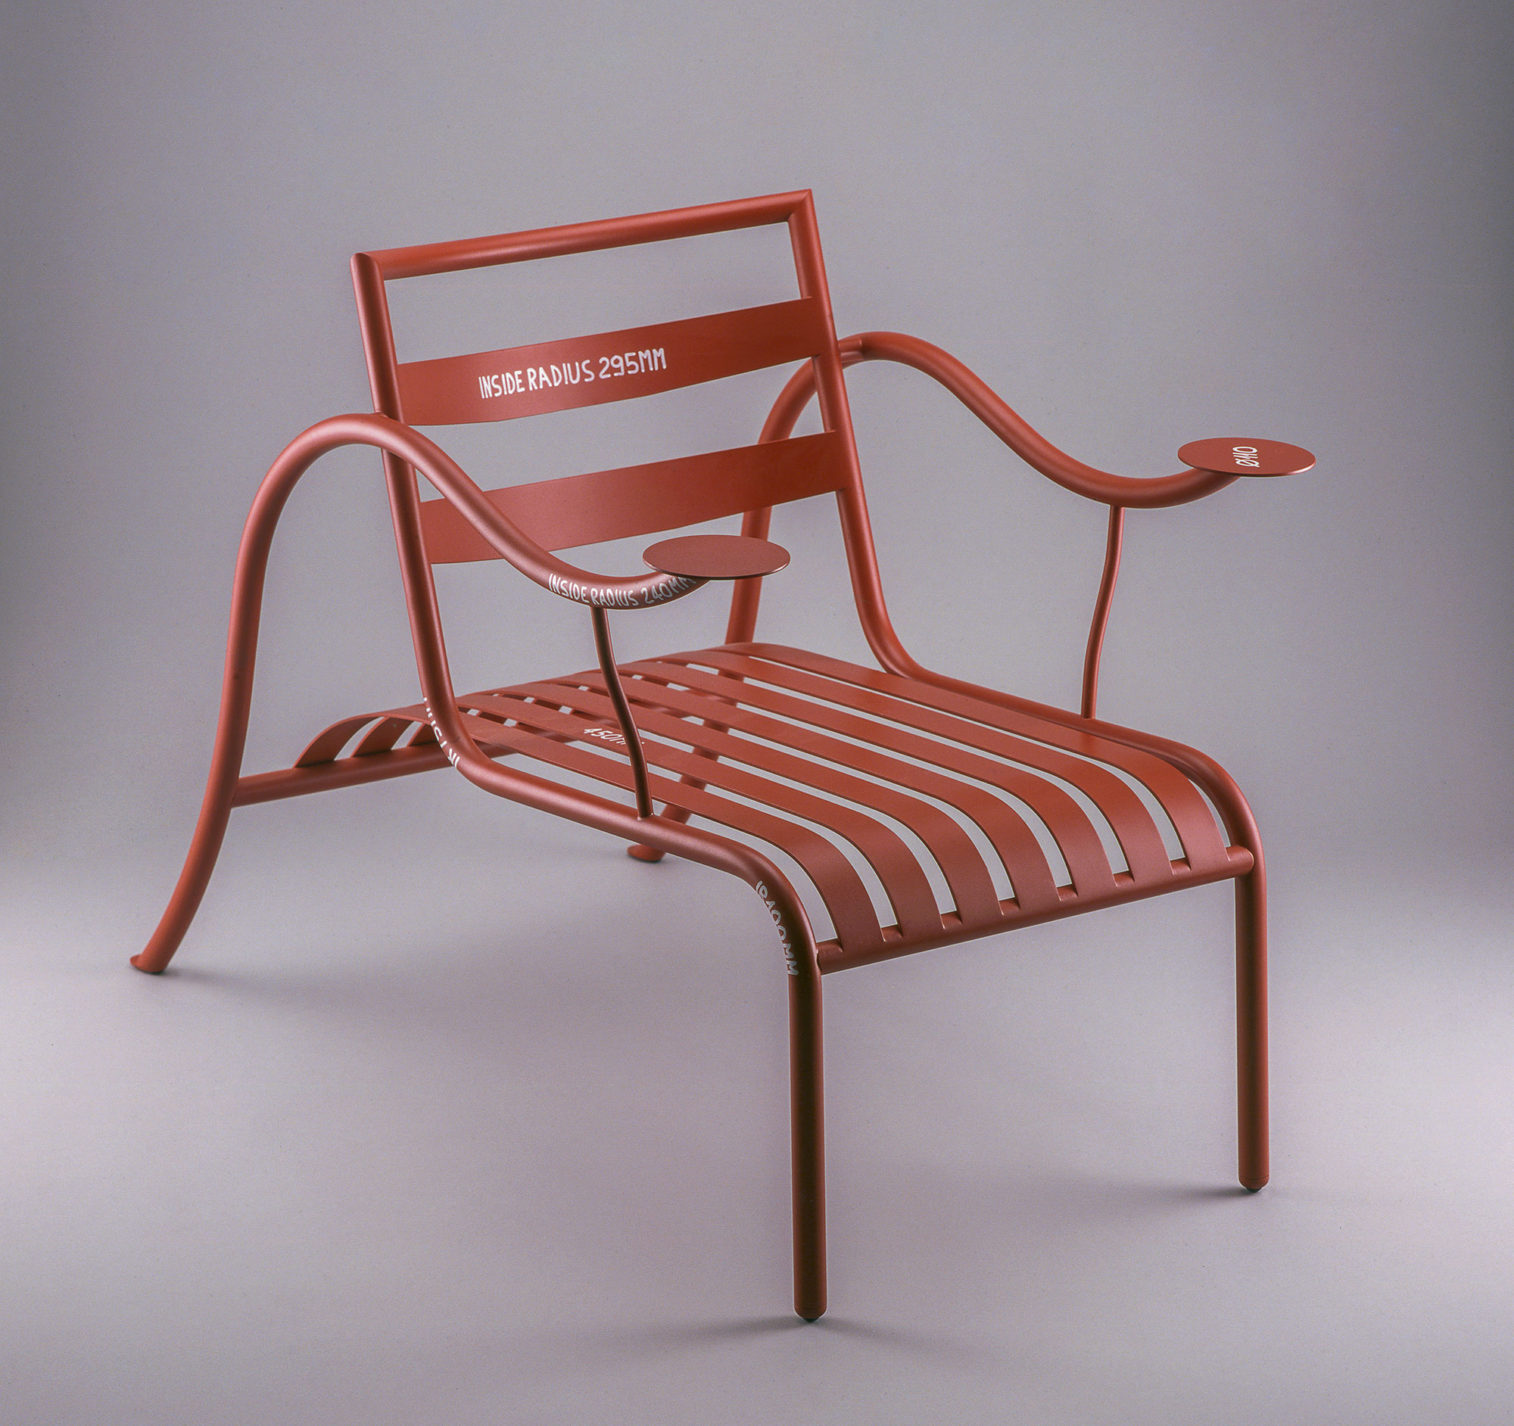 Rust-colored lounge chair in painted steel with curved horizontal back slats. Steel-slat seat extends to curved tubular-steel rear legs, which continue in a single piece to form undulating arms with circular disks at each end.